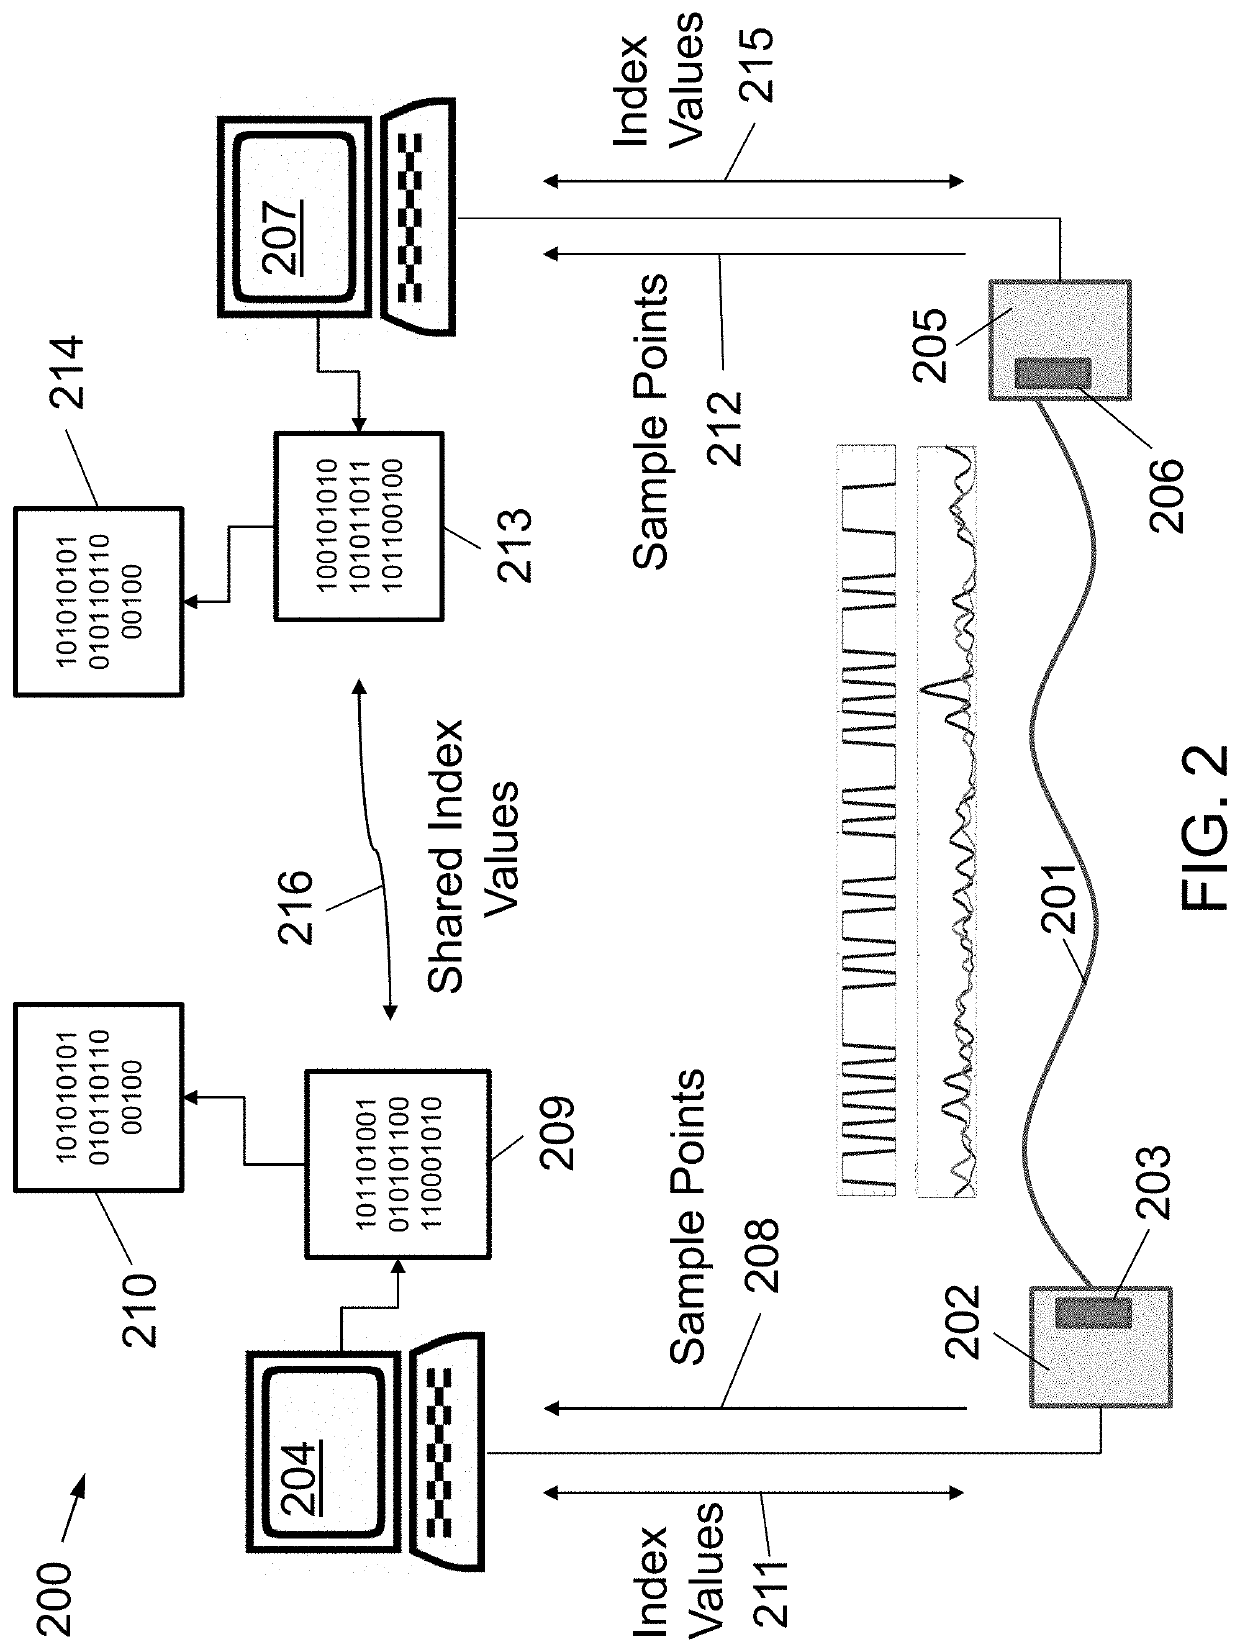 Systems and methods for encrypting communication over a fiber optic line